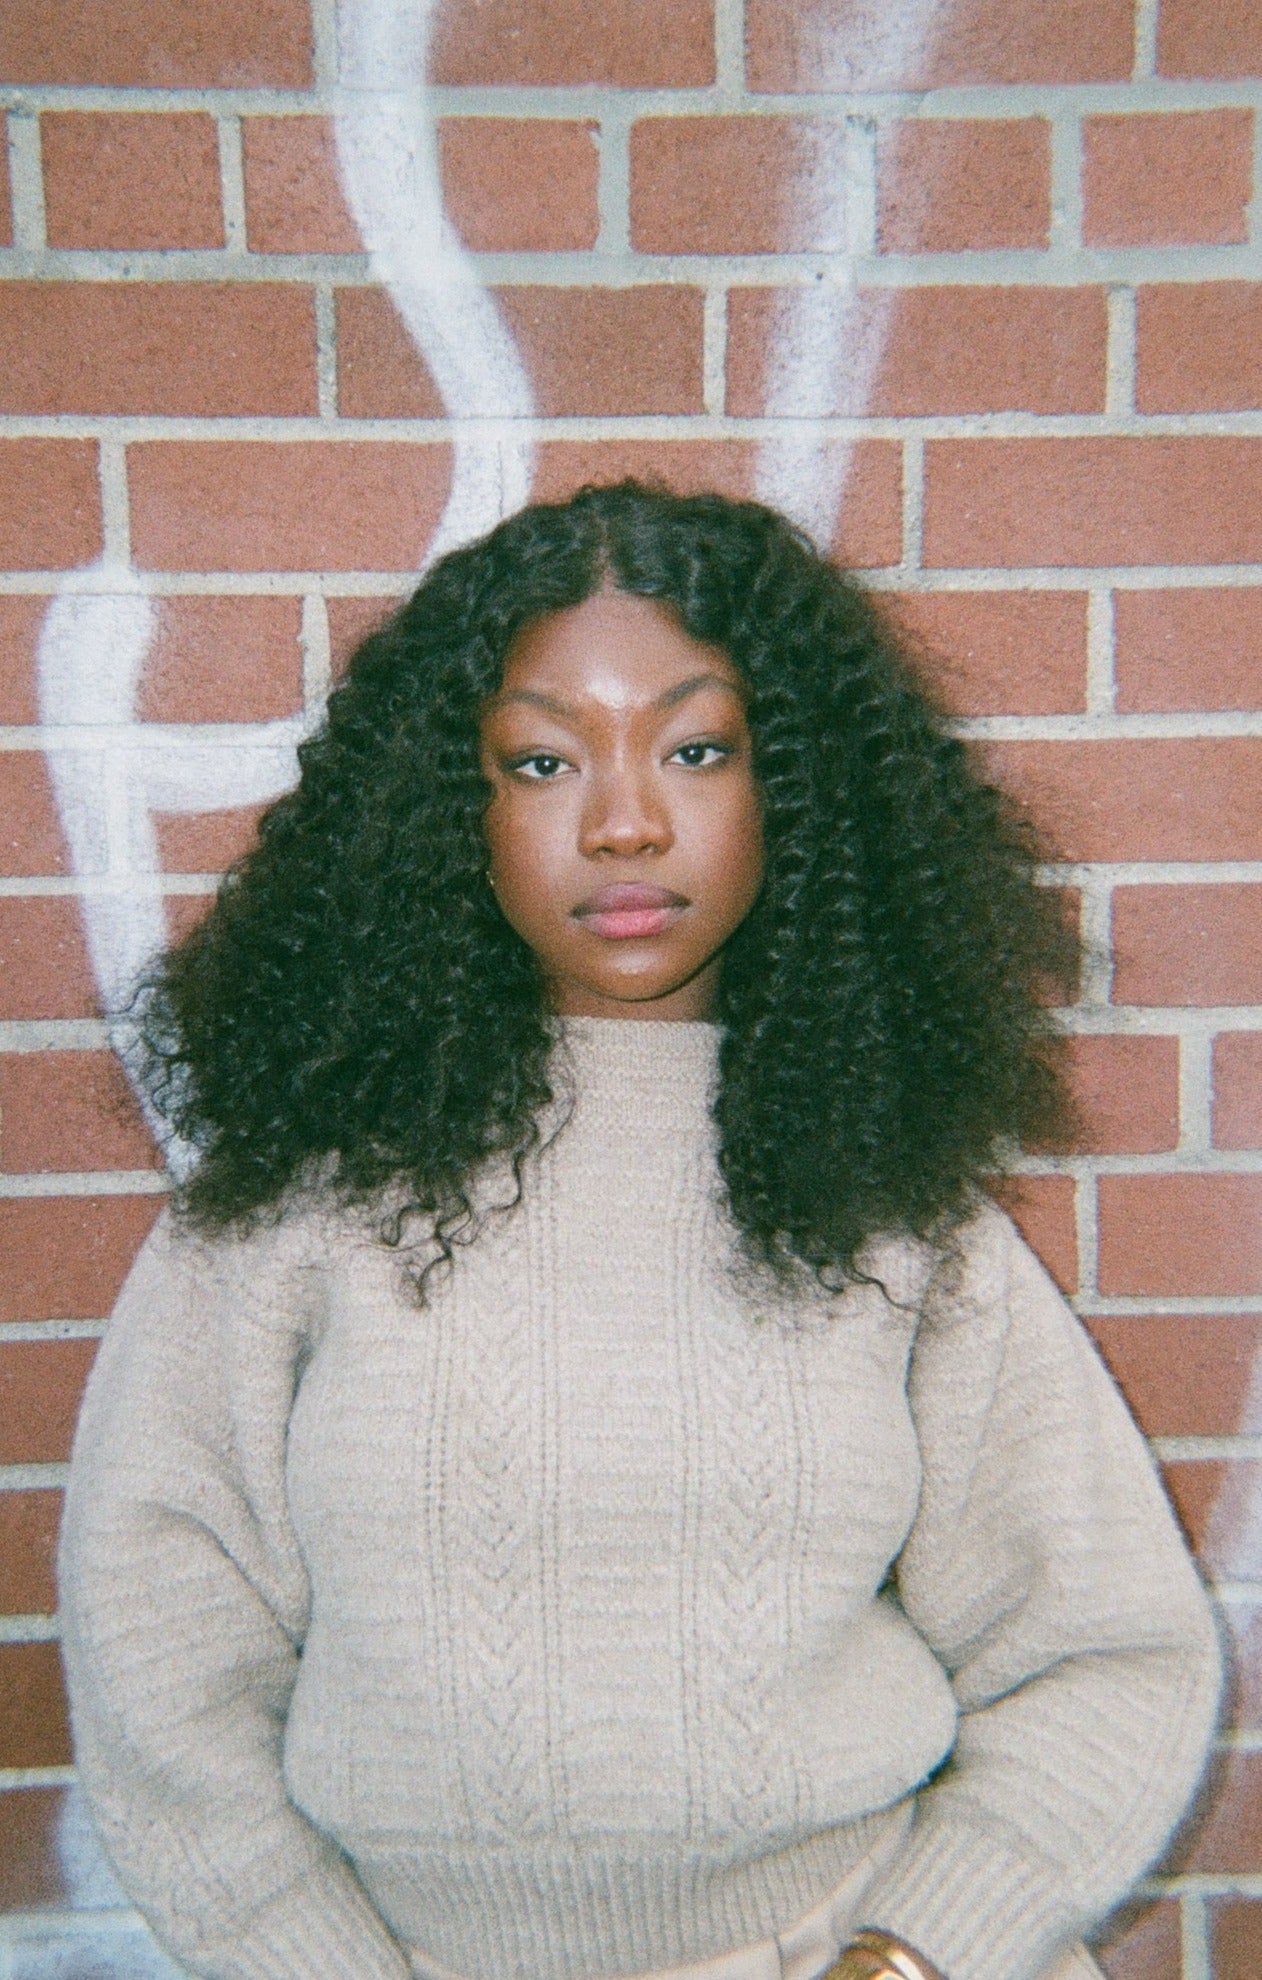 A woman posing in front of a brick wall, showcasing her stylish curly black human hair wig.